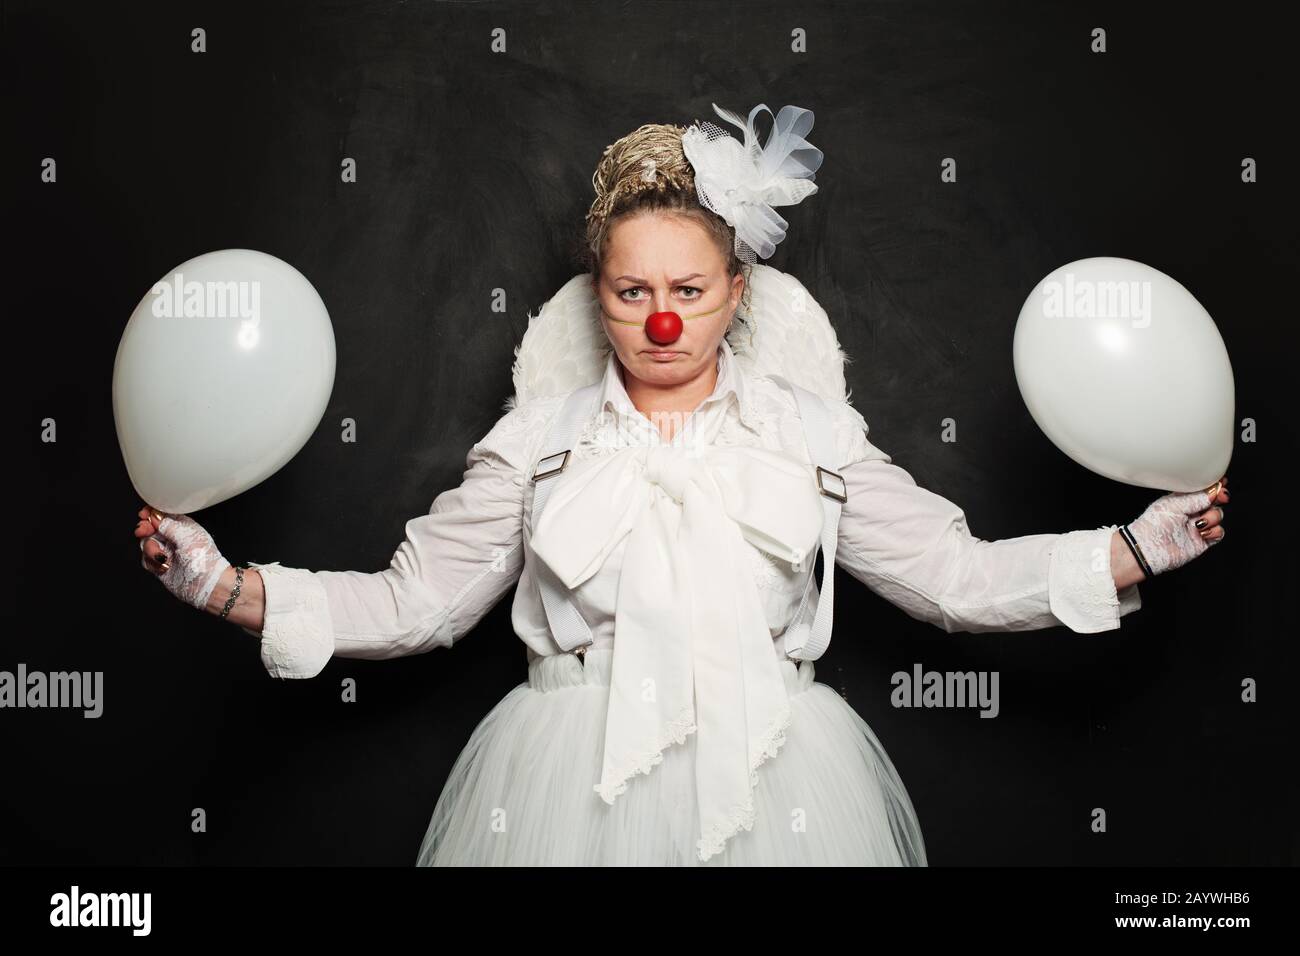 Performance Actress at work, White Clown Character Stock Photo